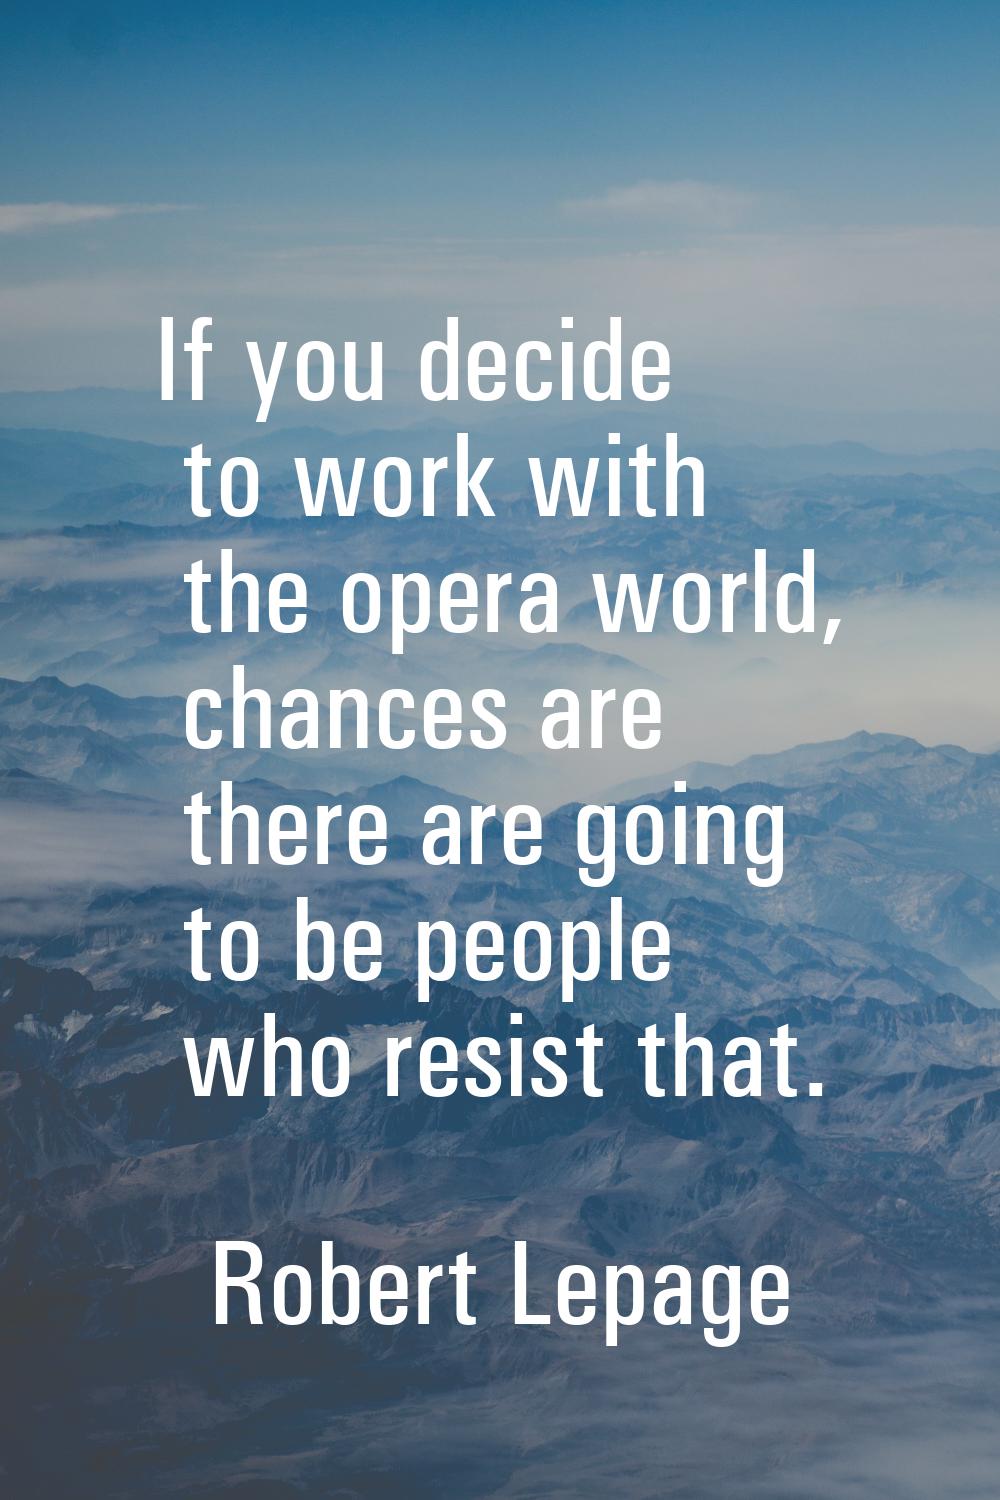 If you decide to work with the opera world, chances are there are going to be people who resist tha